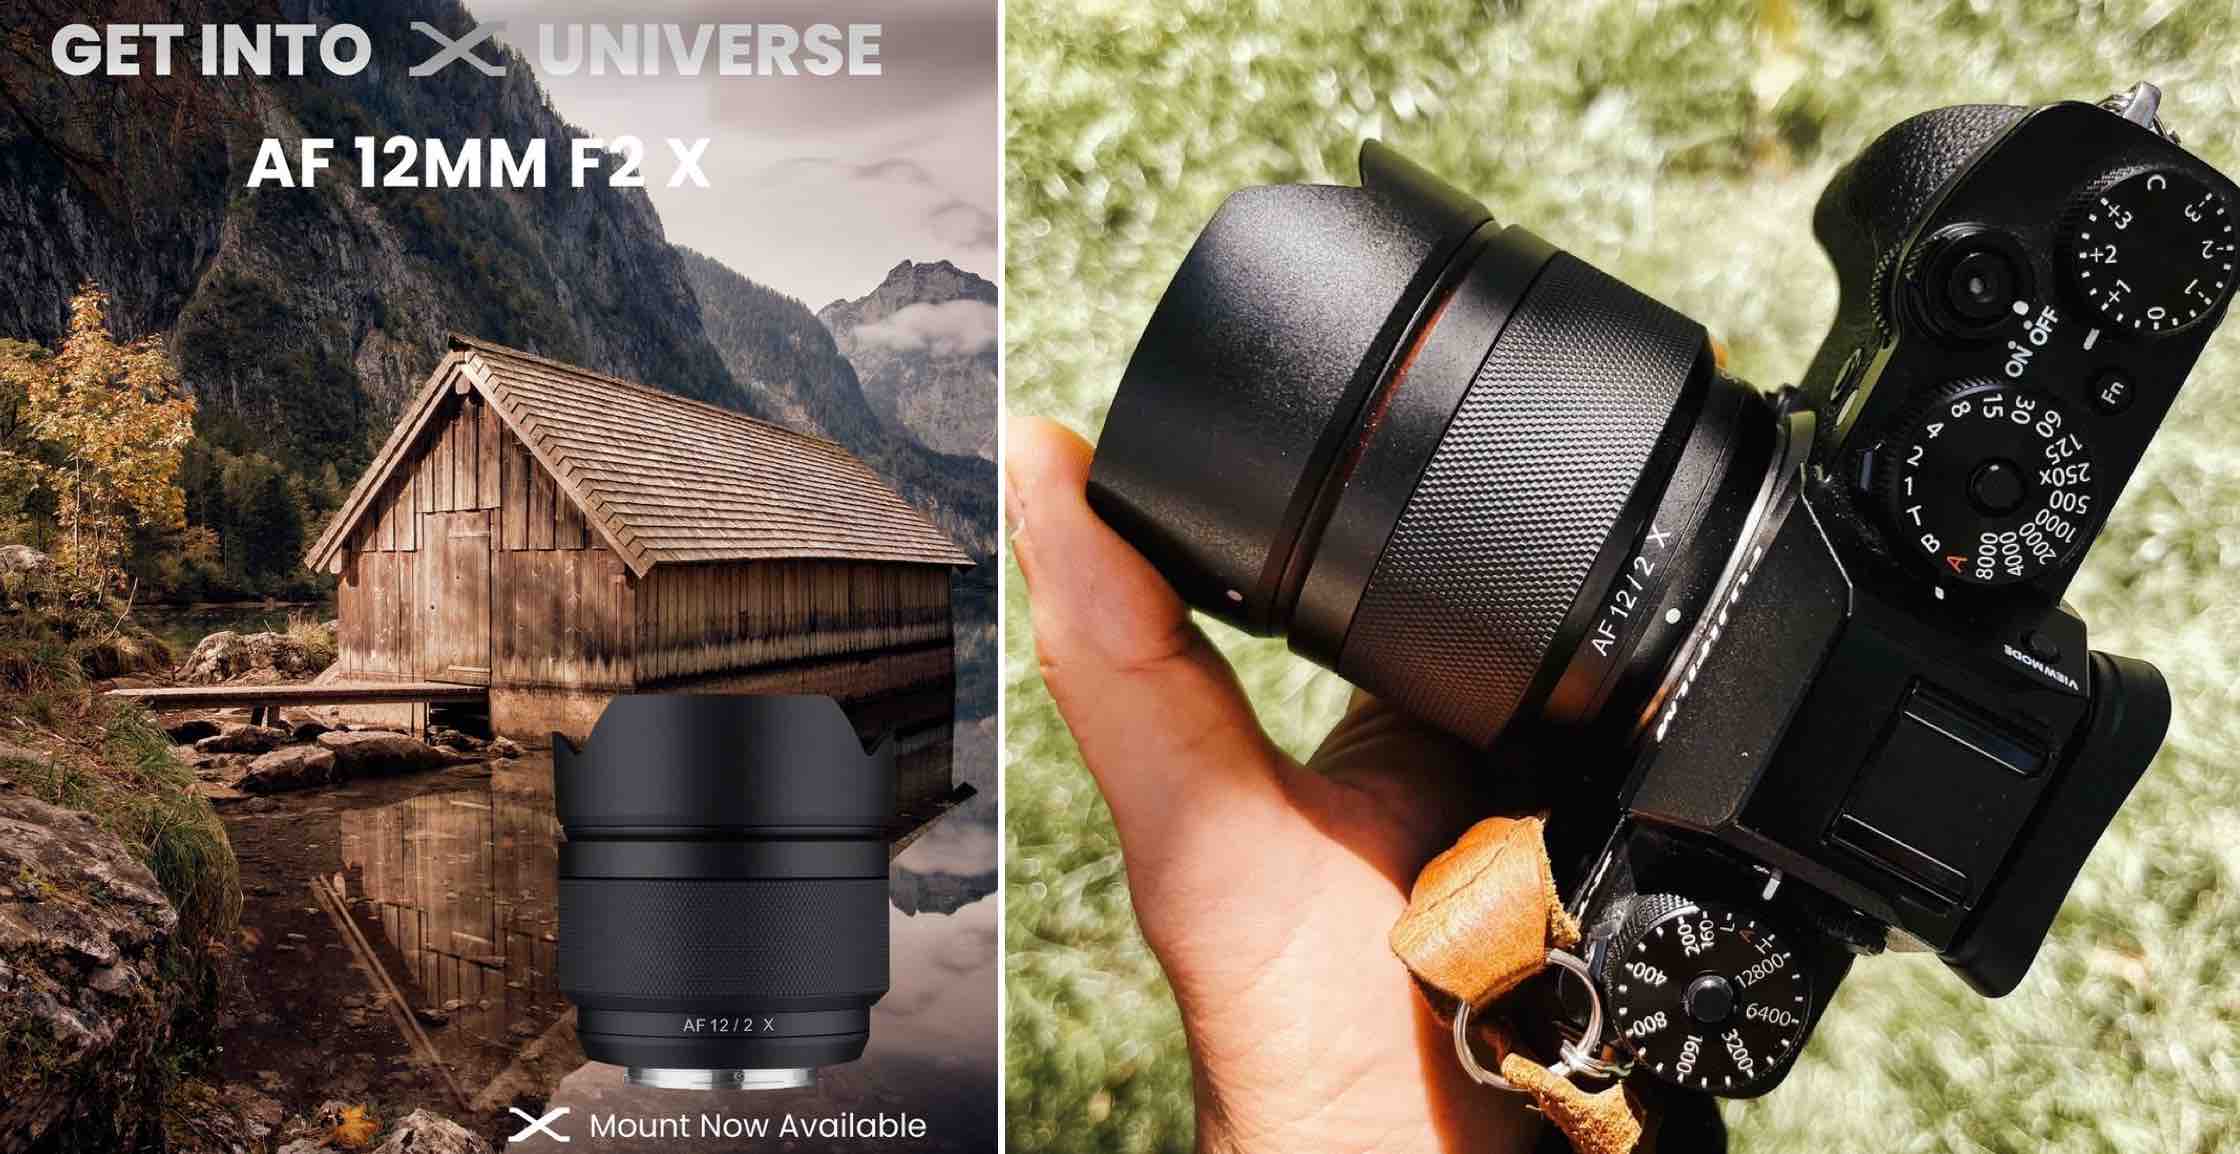 legering buffet Inconsistent Samyang 12mm F2 AF for Fujifilm X Mount Officially Announced - First  Hands-On Reviews - Fuji Rumors